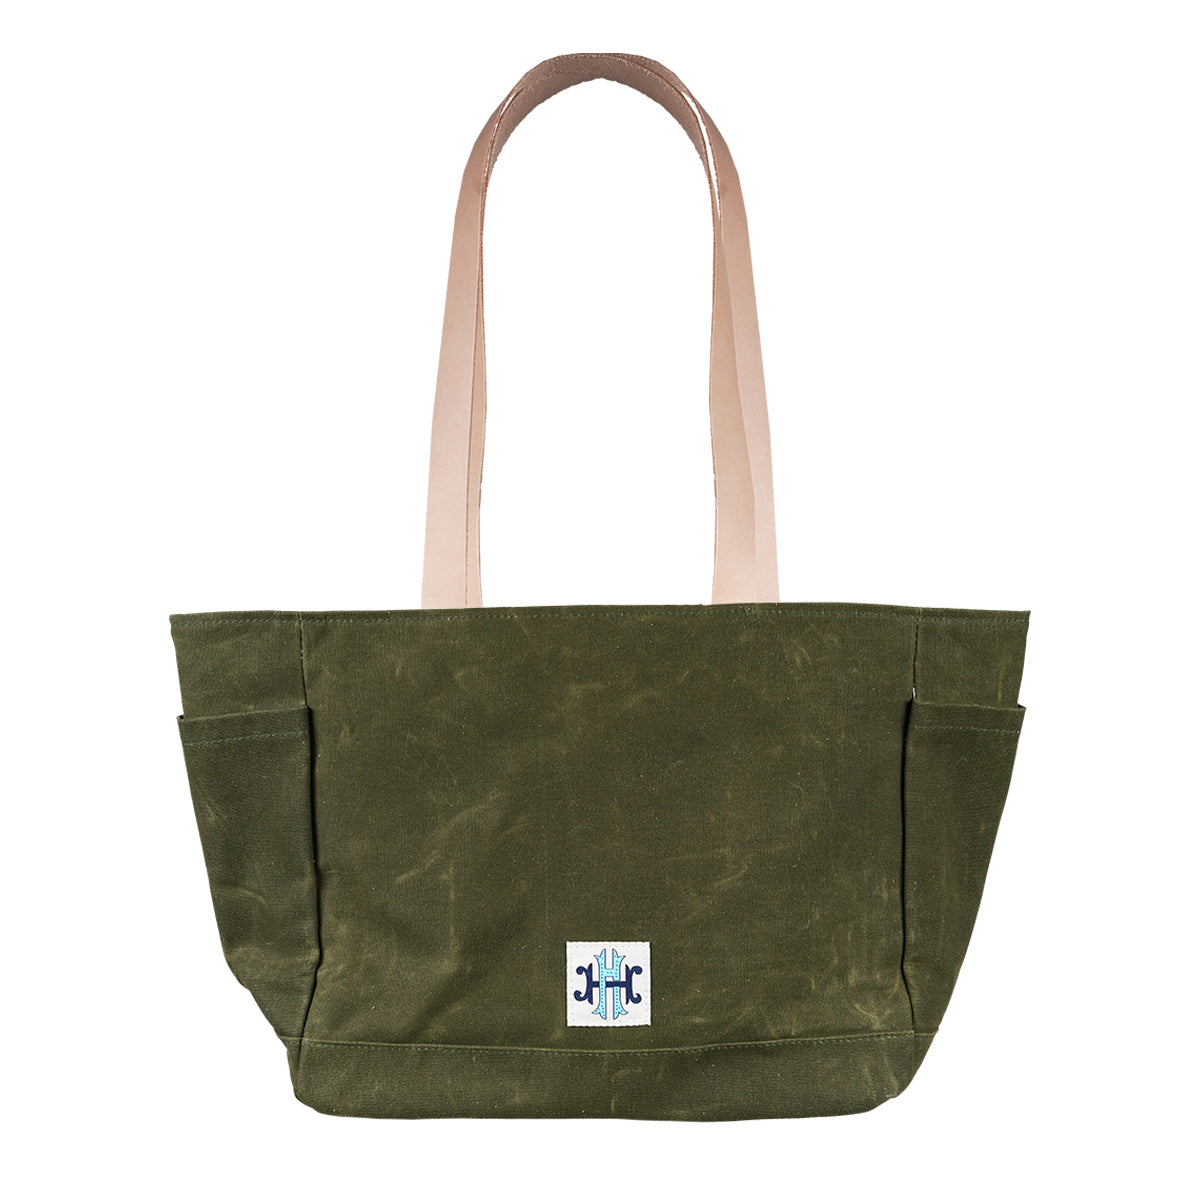 Henry Dry Goods Keeneland Toile No. 3 Tote